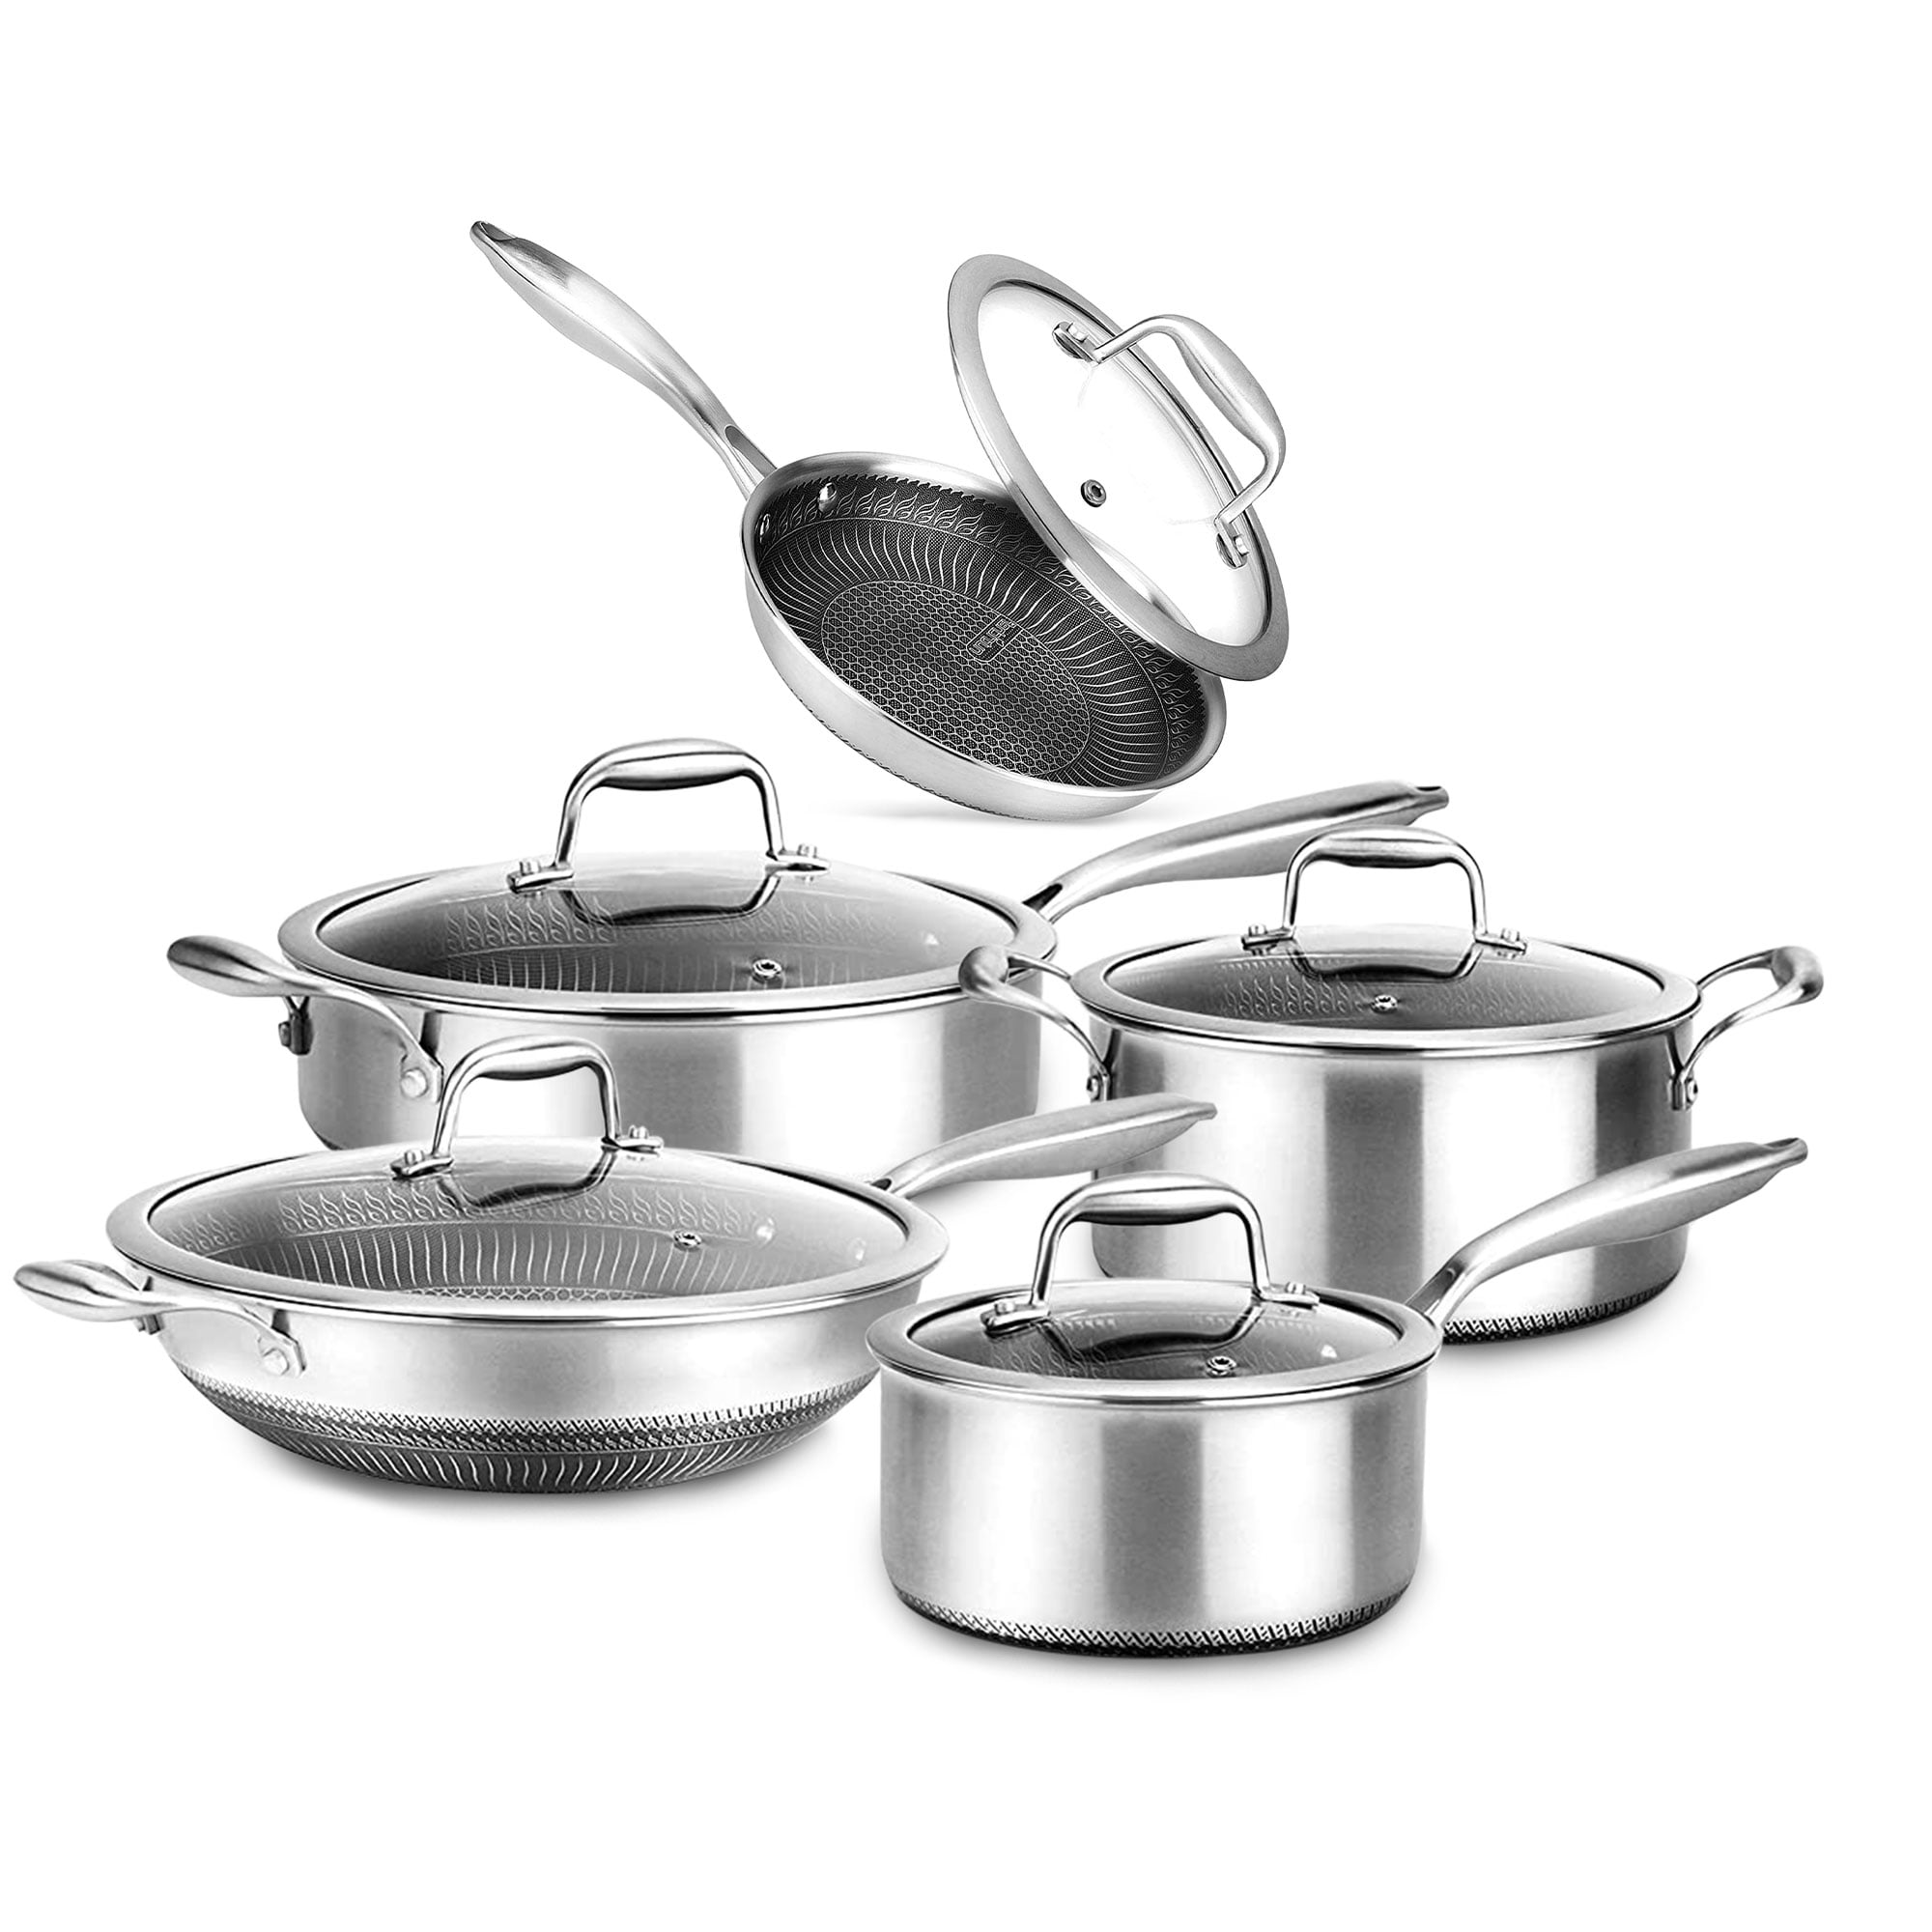 Details about   8-Pcs Triply Cookware Set Stainless Steel Quality Kitchenware Pots & Pans Set 